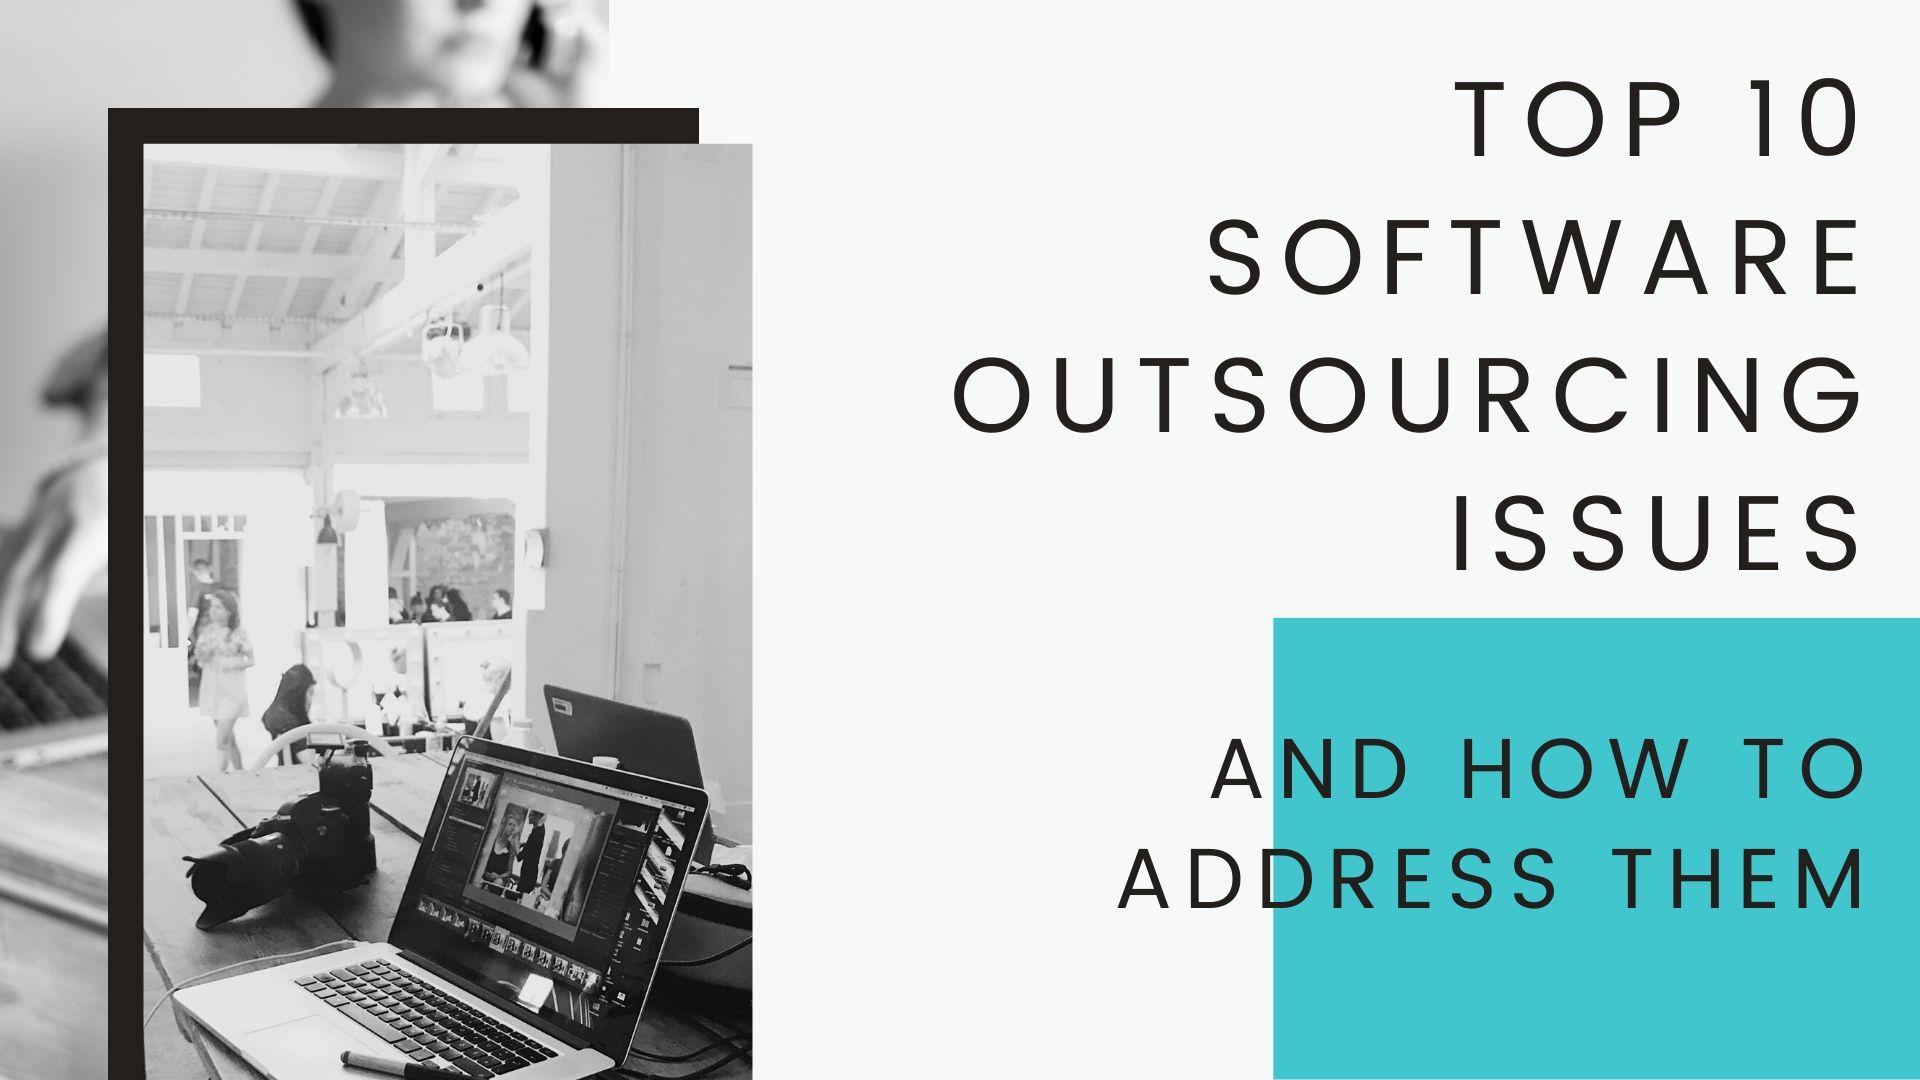 TOP 10 SOFTWARE OUTSOURCING ISSUES AND HOW TO ADDRESS THEM